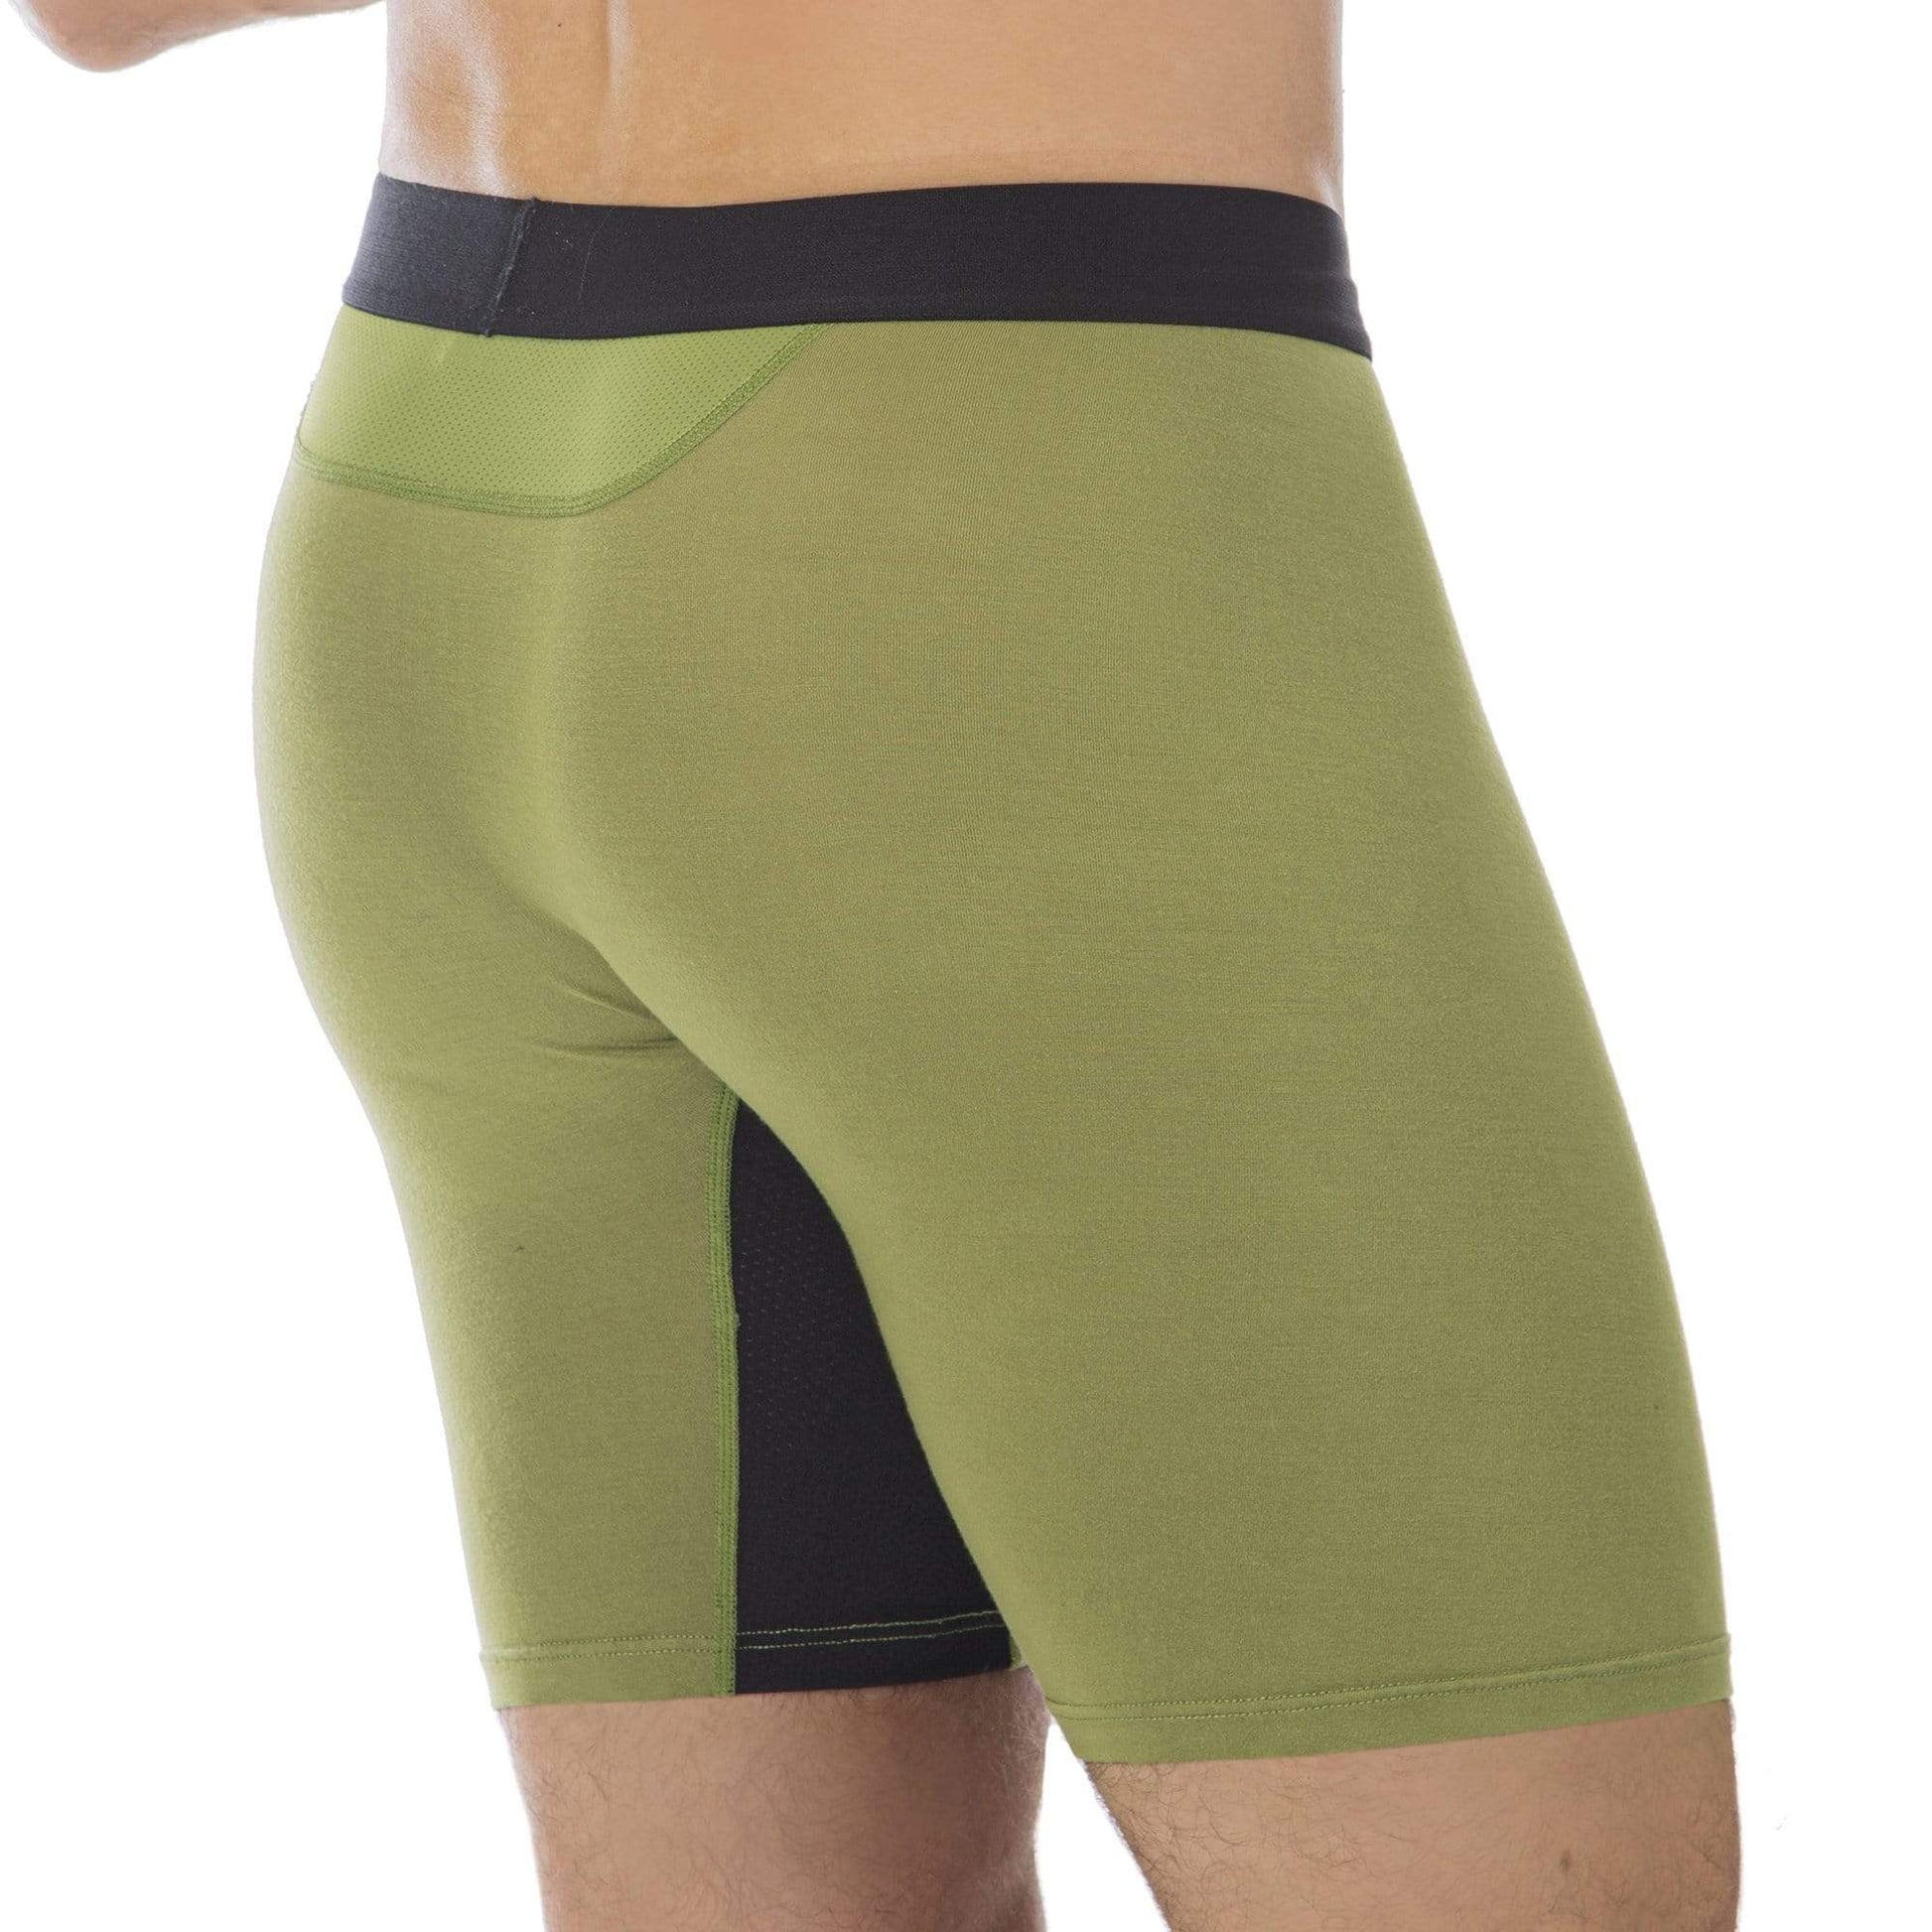 Compression Shorts with Total Support Pouch, C Logo, 9